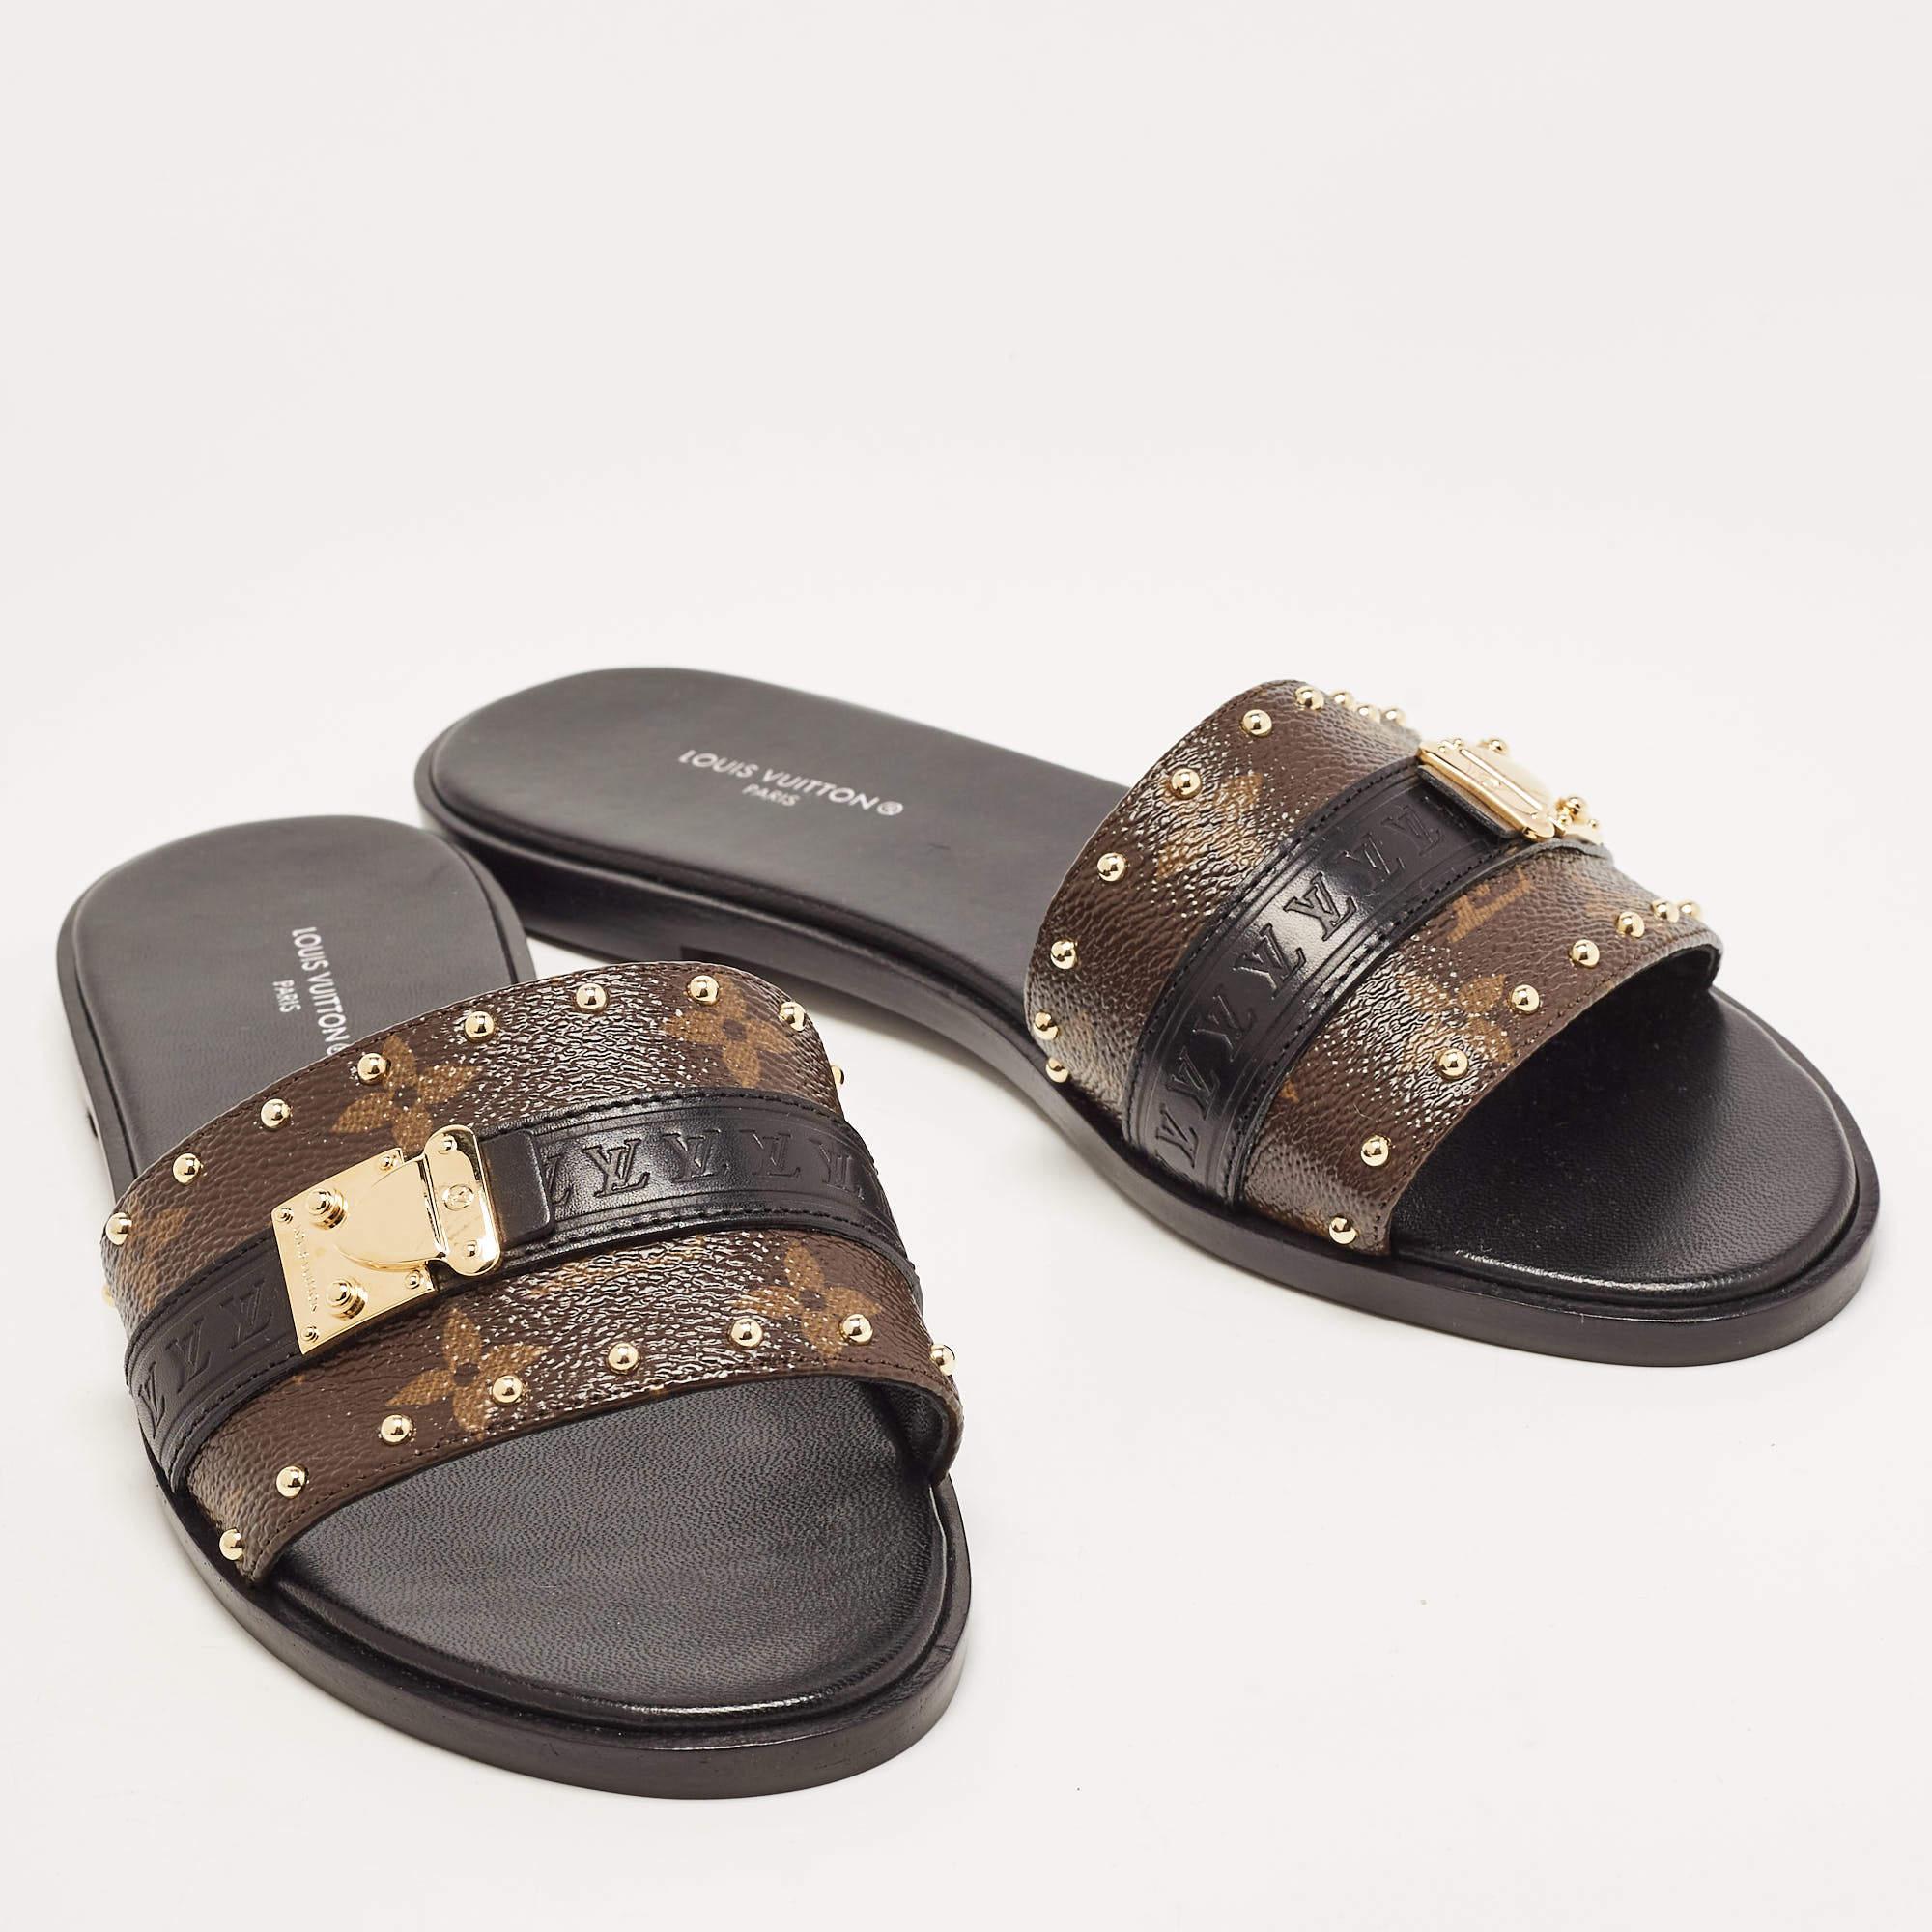 Present your feet with utmost comfort by choosing these 'Lock It' flat sandals from the iconic house of Louis Vuitton. They are crafted from the signature monogram canvas and detailed with two-tone 'LV' padlocks on the vamp straps. They are equipped